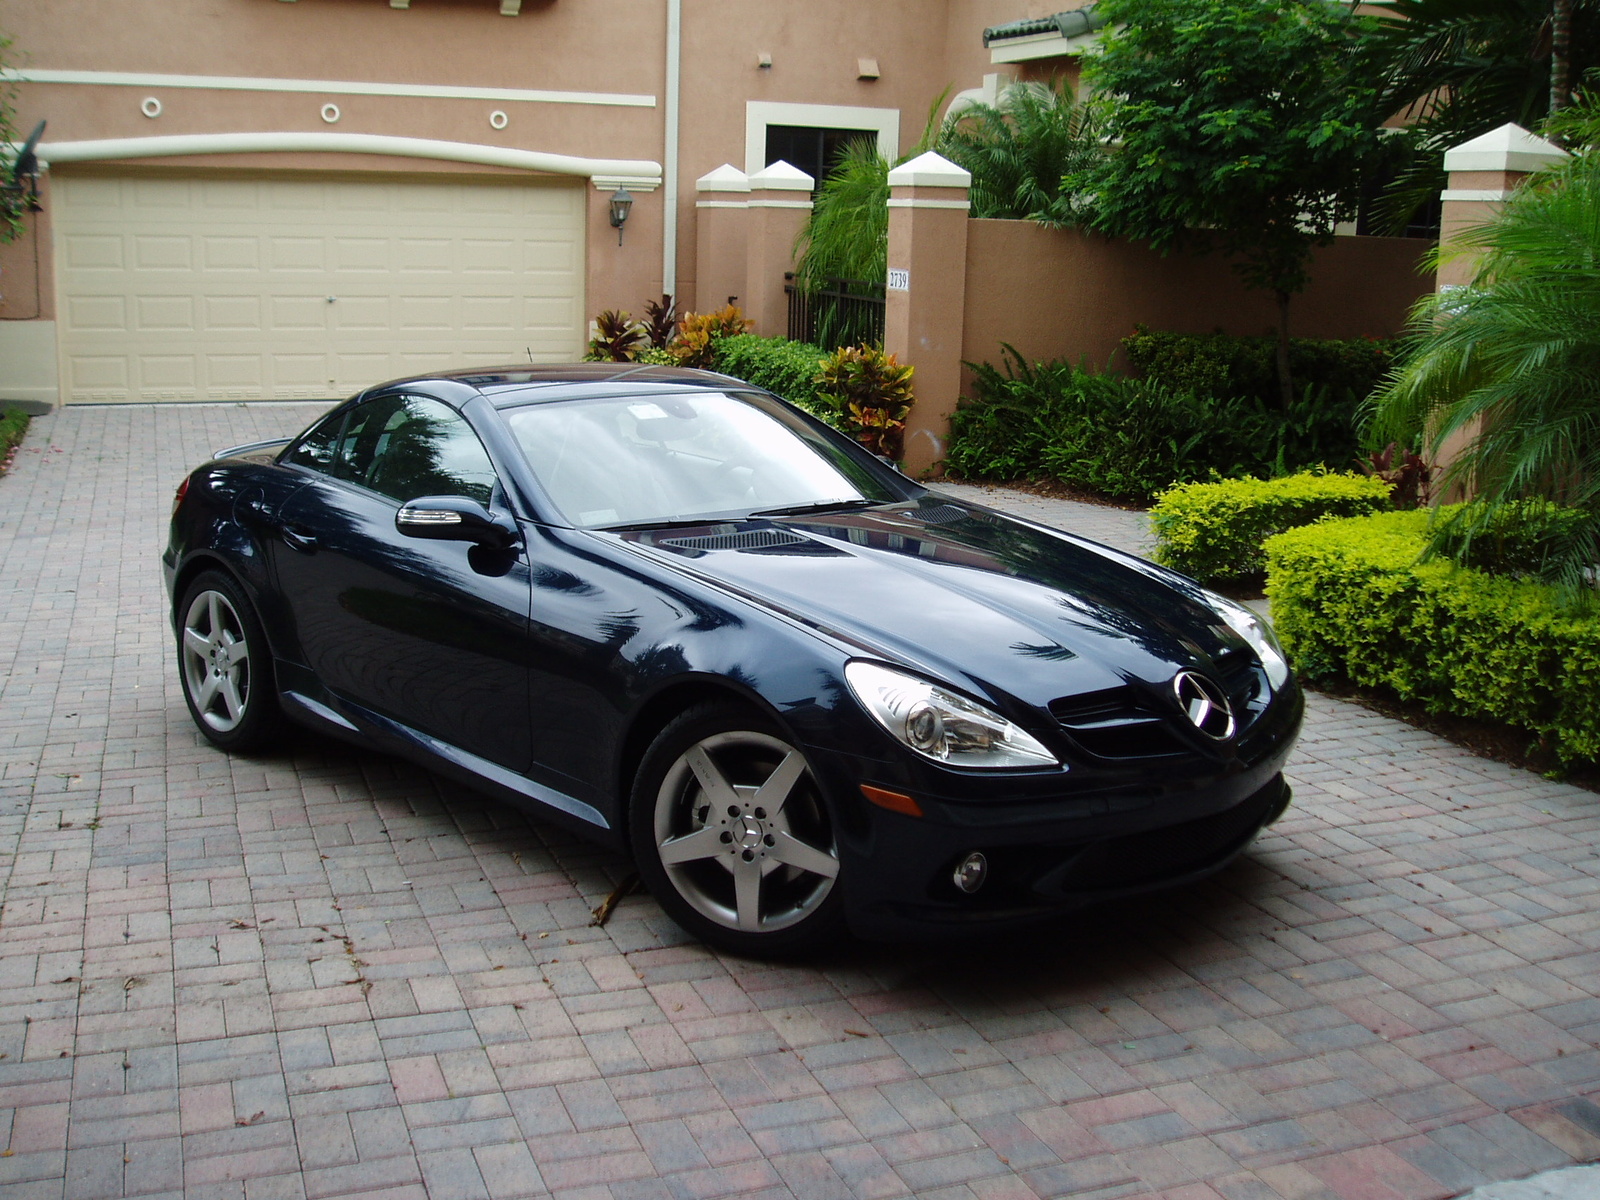 Pro and cons of the 2006 mercedes benze slk 280 #2